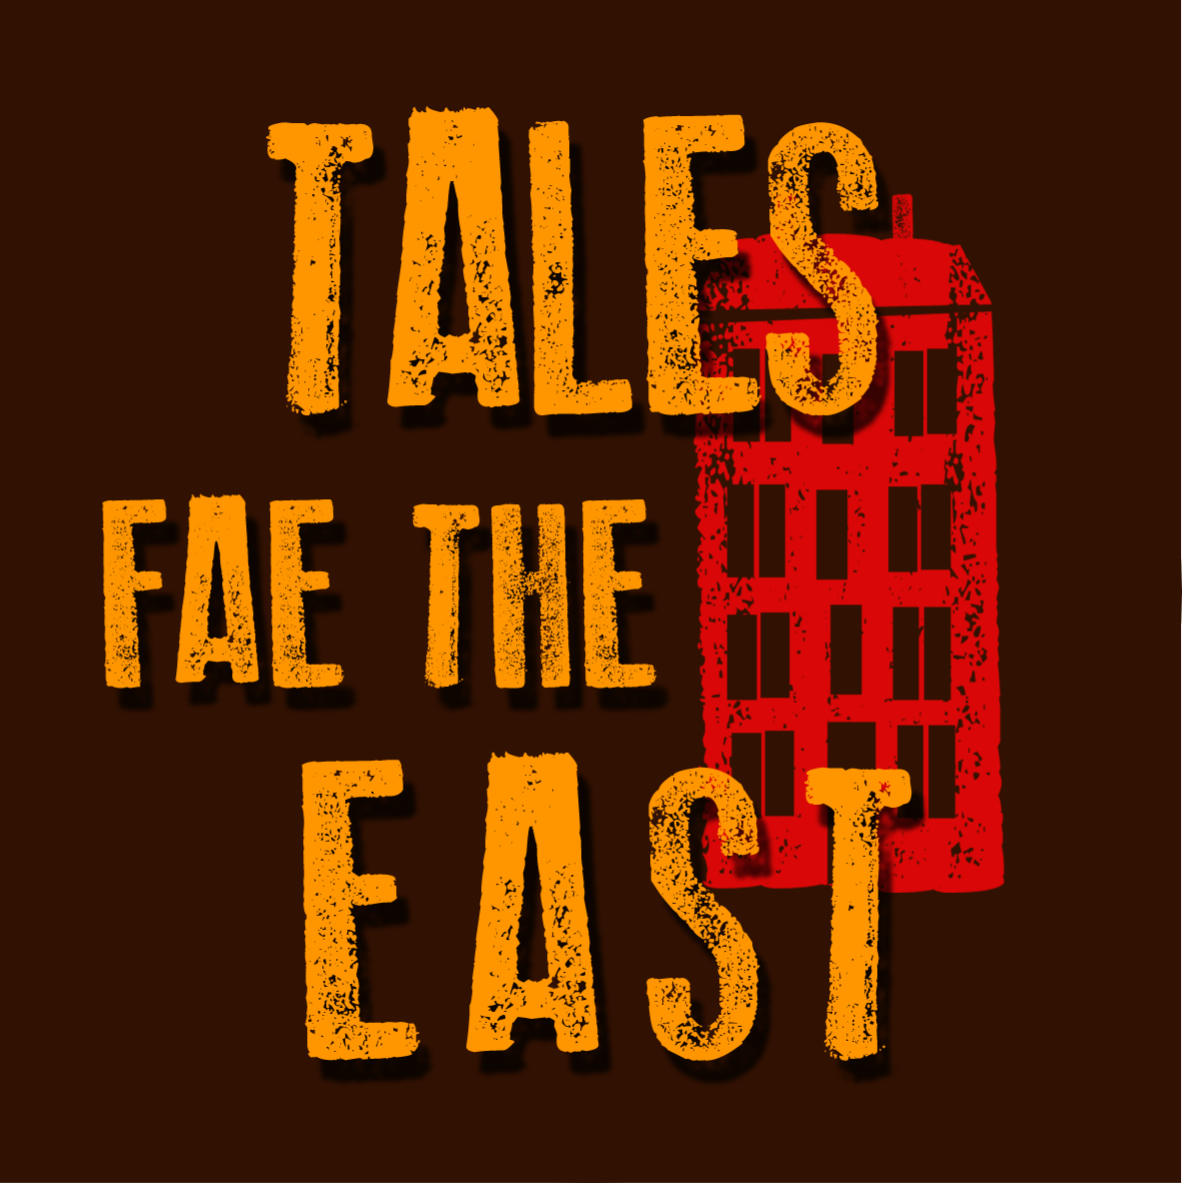 Tales Fae the East - podcast and photography project